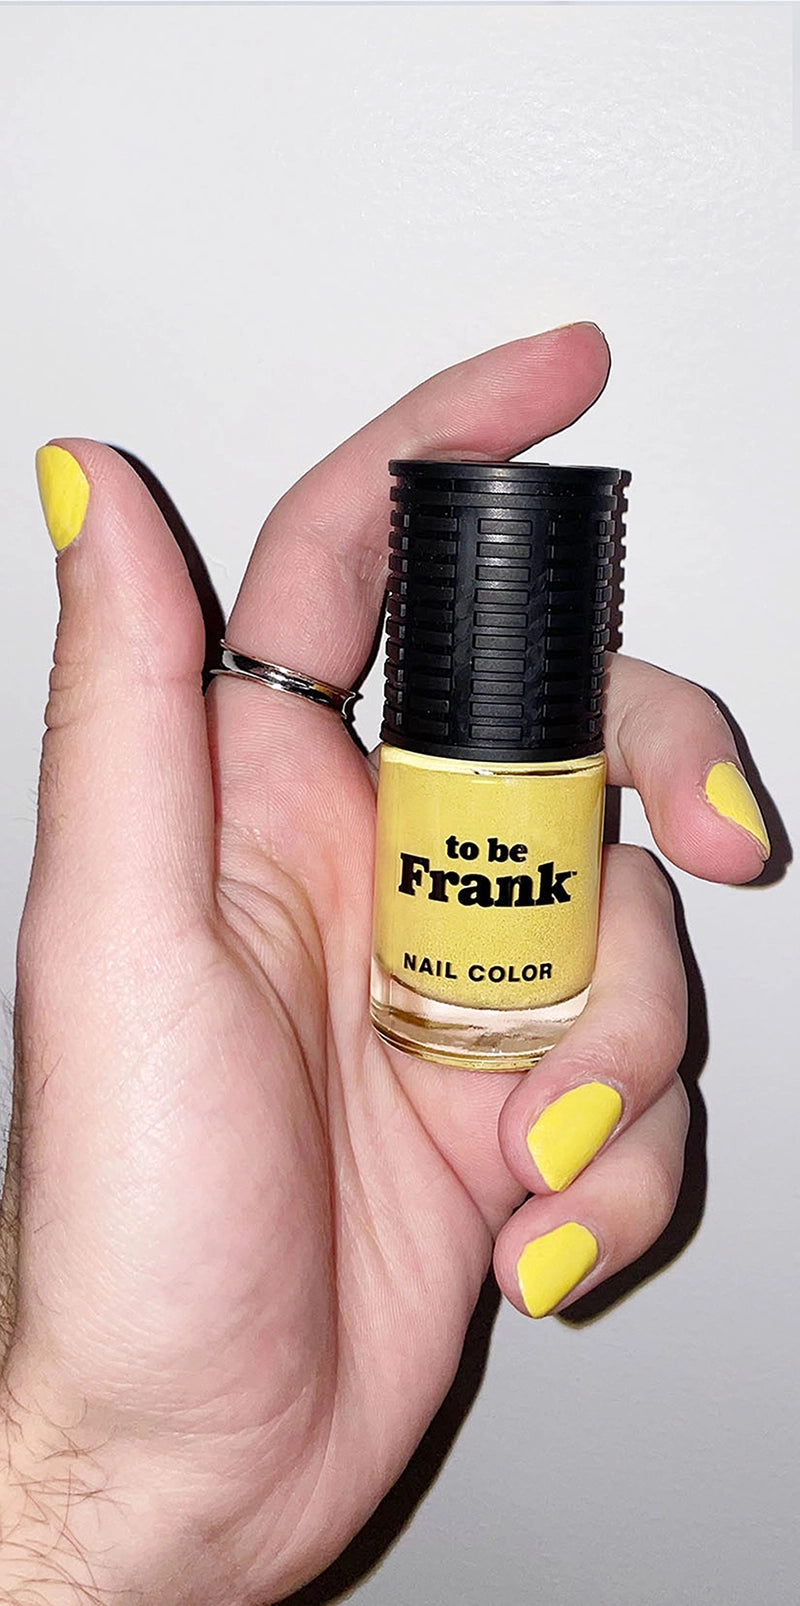 Bright Yellow Press on Nails / One Color Basic Press Ons - Etsy